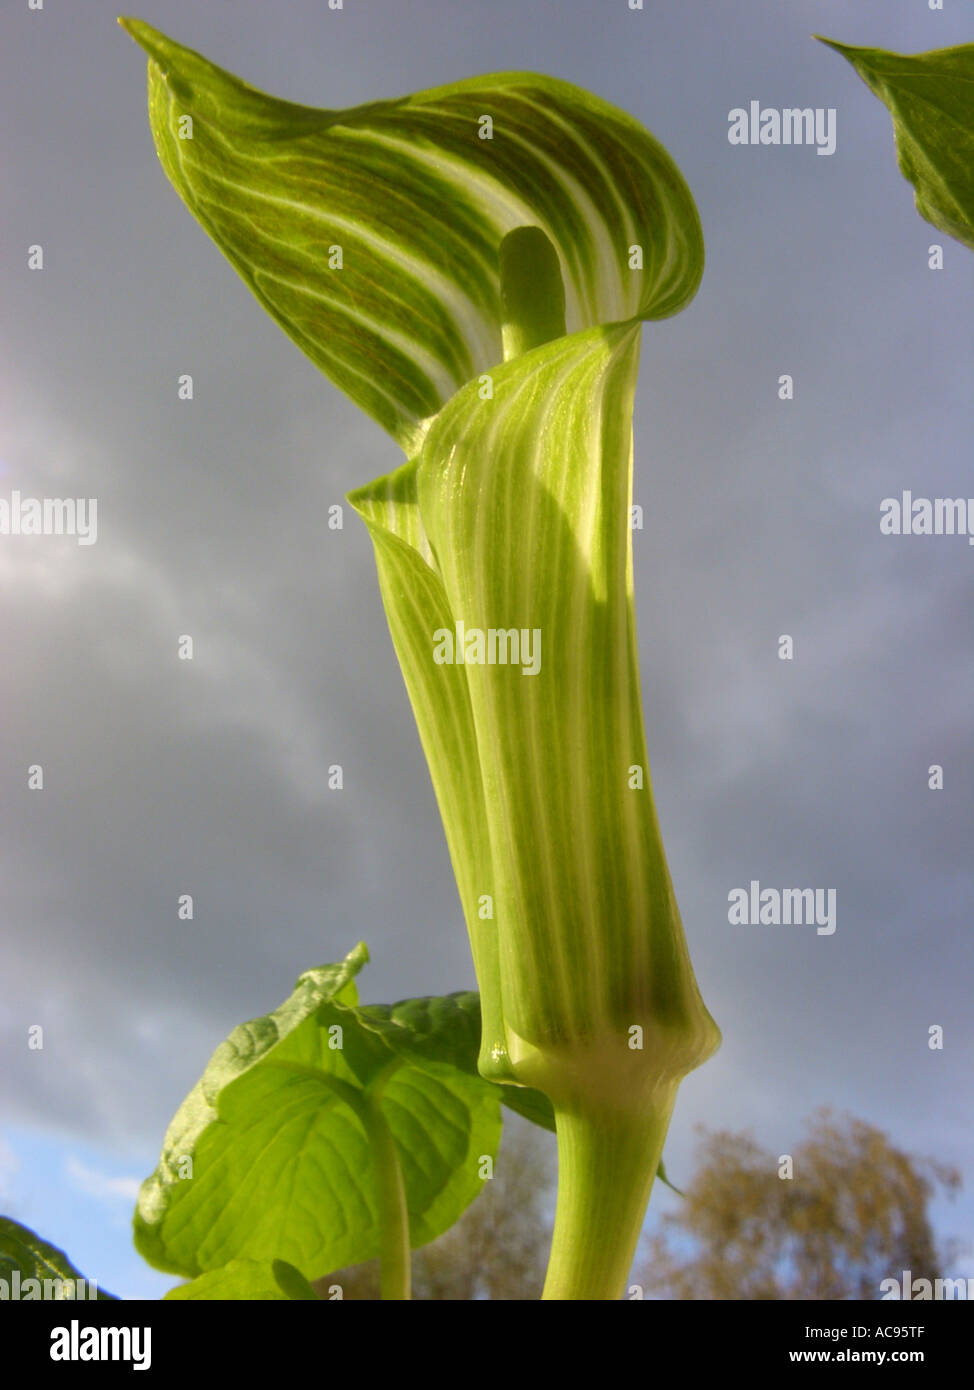 Indian turnip, Jack-in-the-pulpit, Jack in the pulpit (Arisaema triphyllum), inflorescence in the evening sun Stock Photo